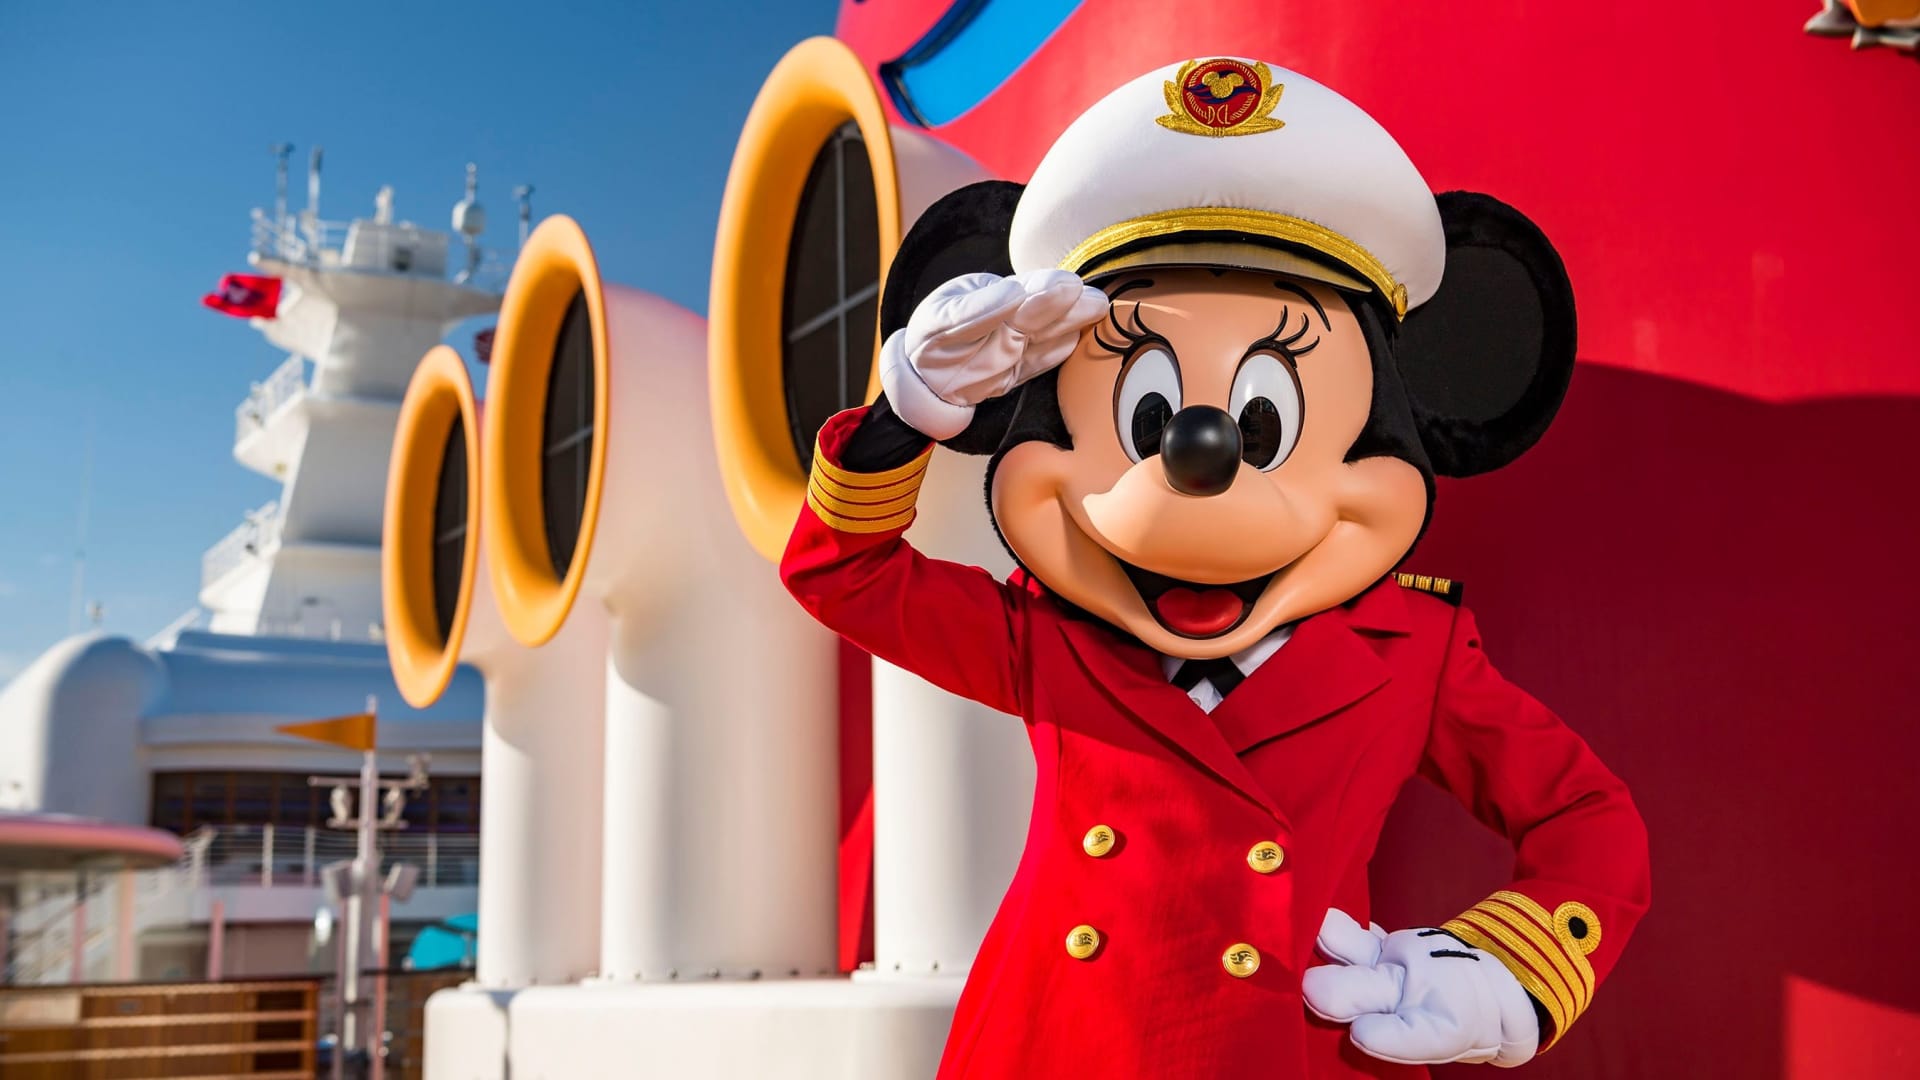 Captain Minnie Mouse, 'Frozen' and a $5,000 Star Wars cocktail: Disney pins big hopes on new Wish cruise ship